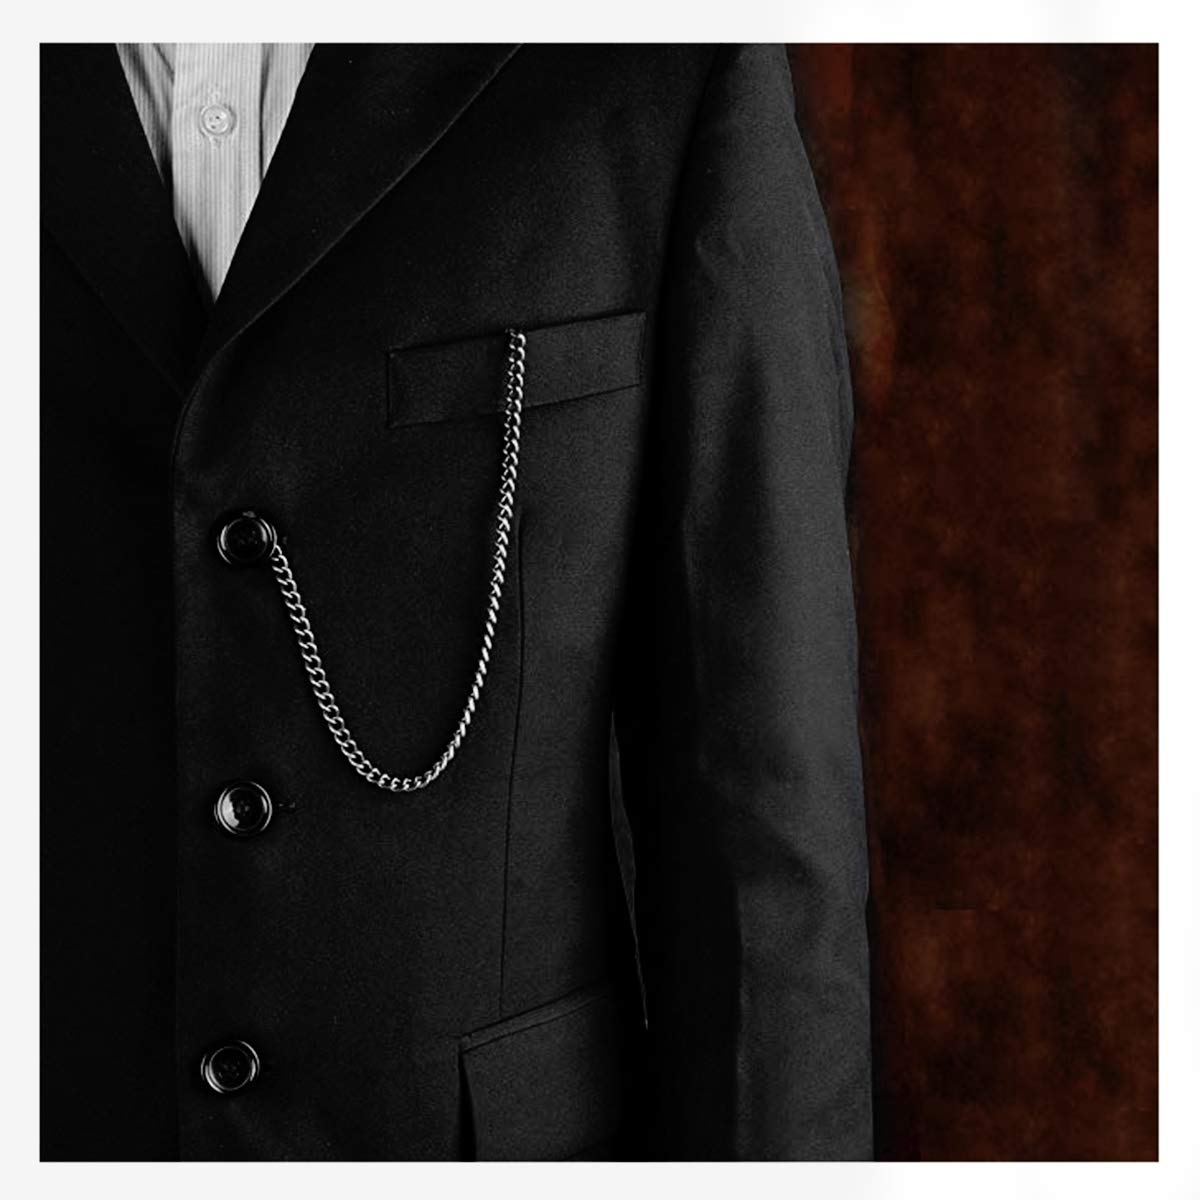 CHICTRY T-bar Pocket Watch Chain Vintage Chrome-Plated Vest Waistcoat Albert Pocket Chain Link with Lobster Clasps